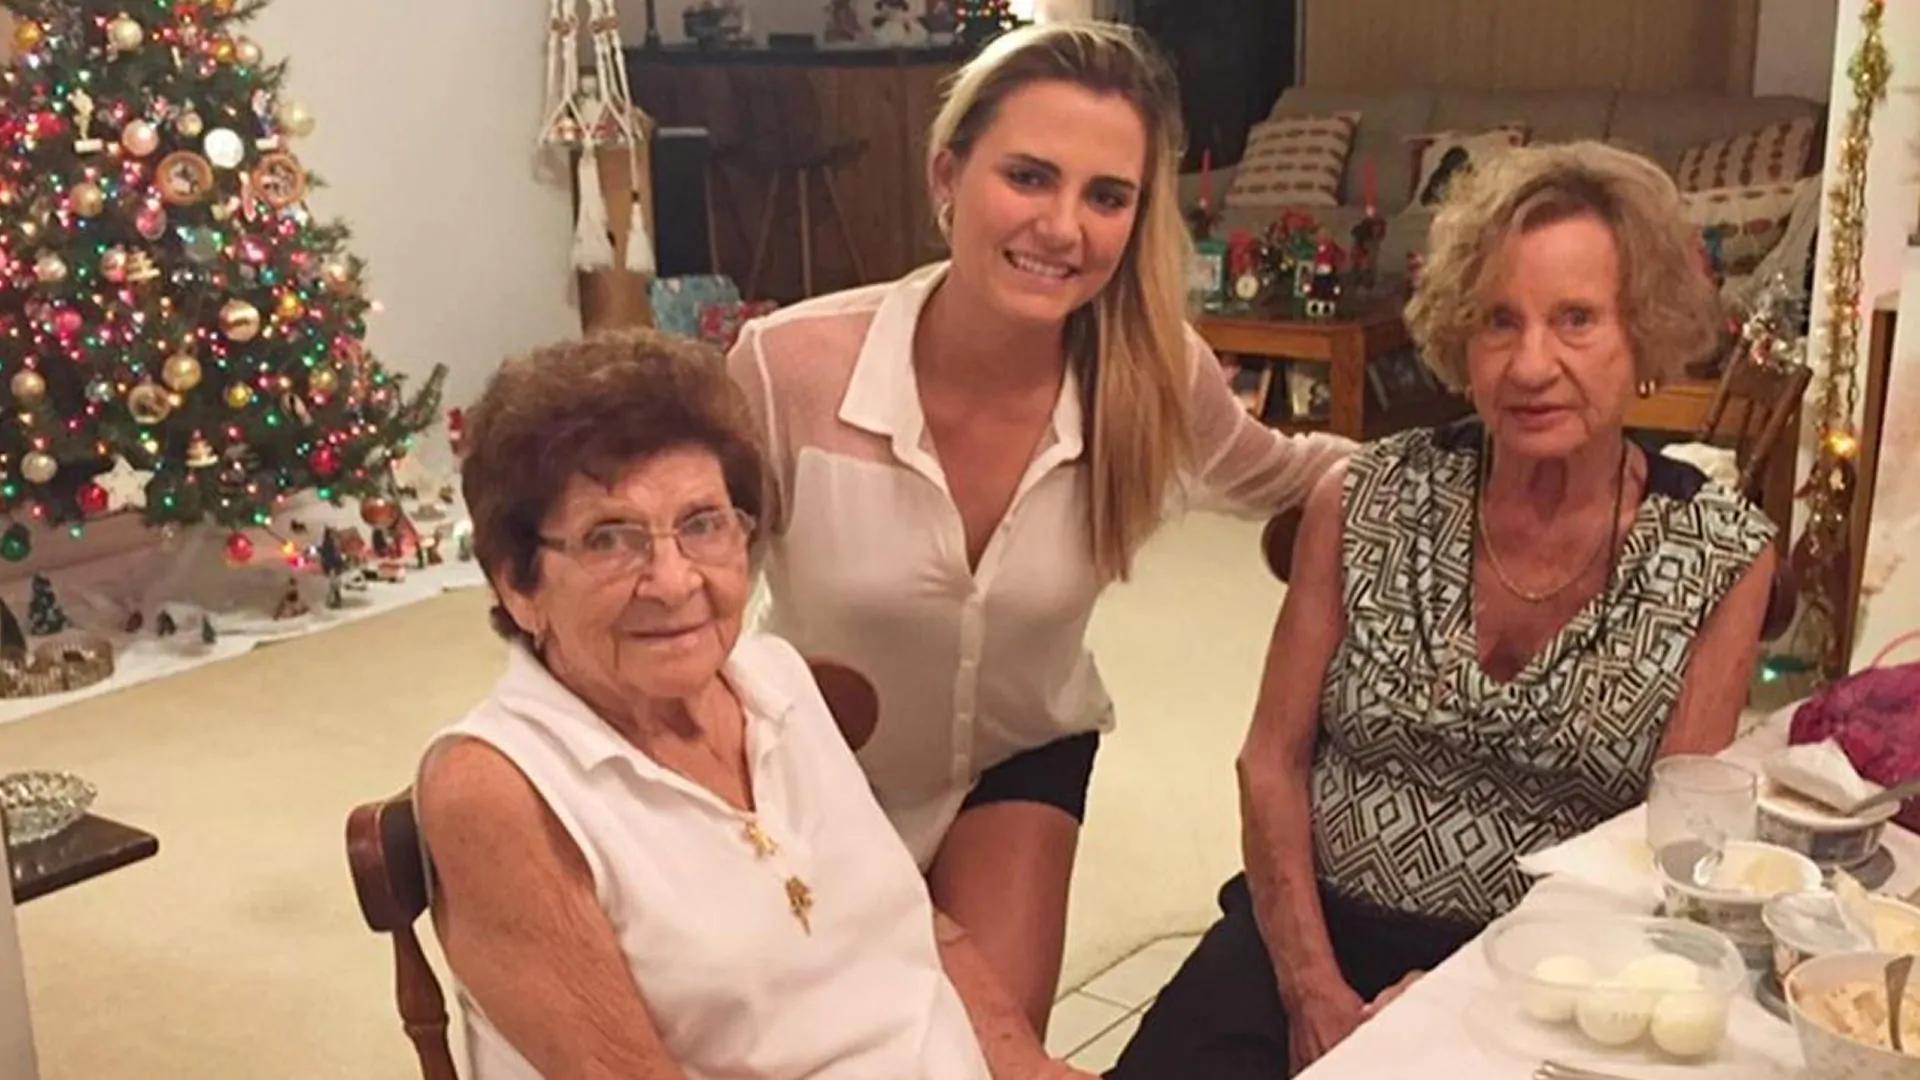 Lexi stepping away from social media after grandmother's death 1